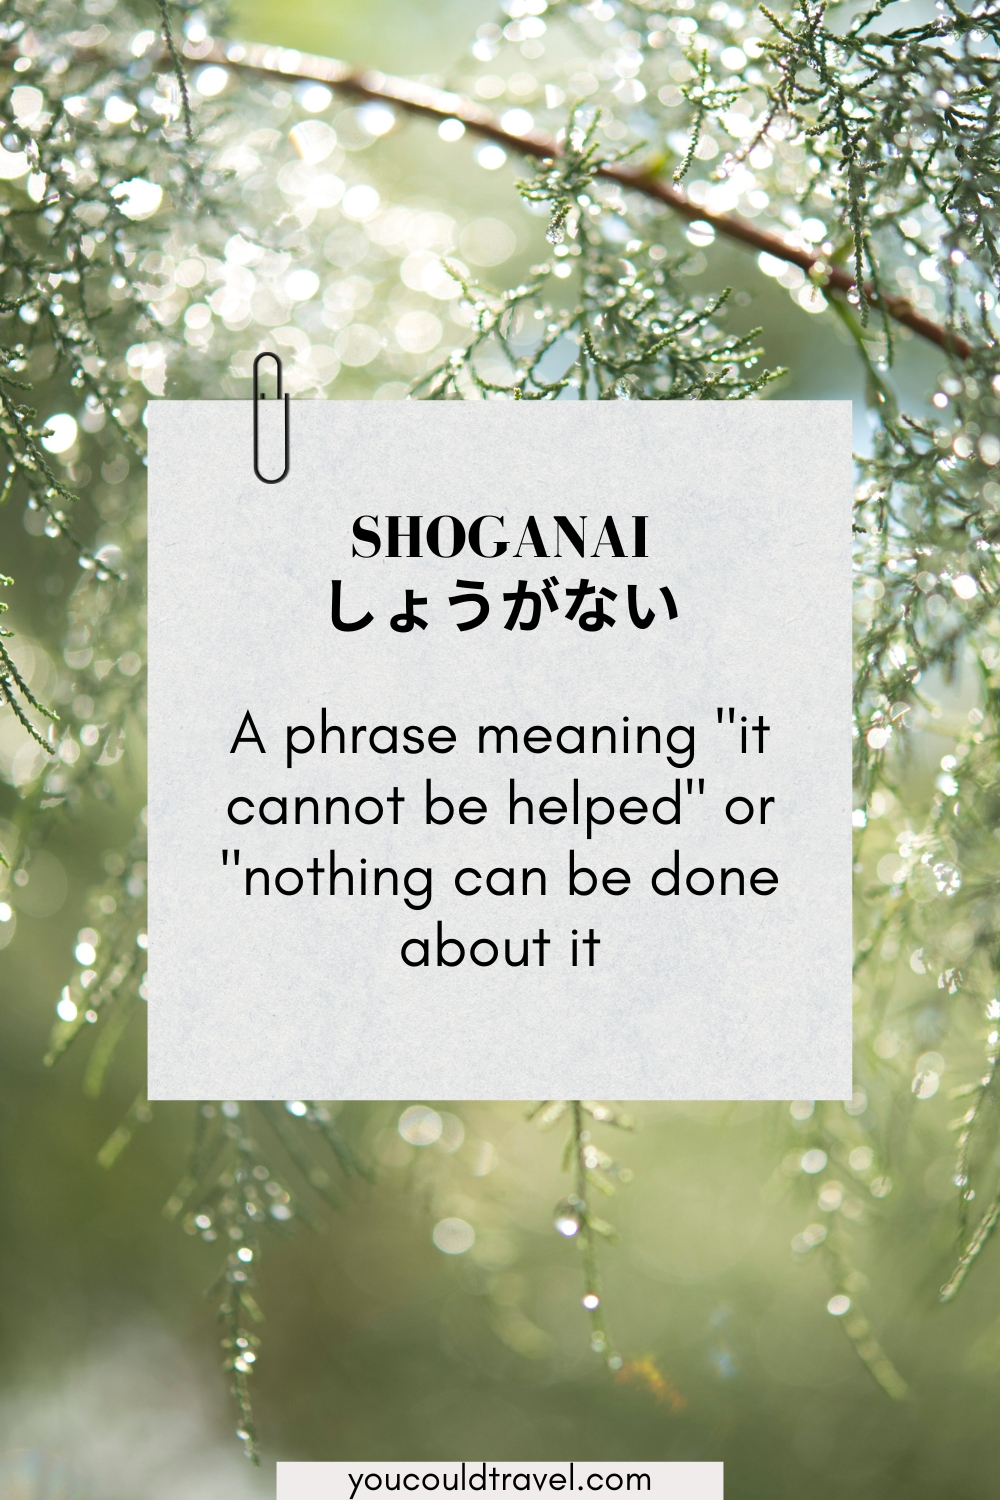 Shoganai - the Japanese word for it cannot be helped